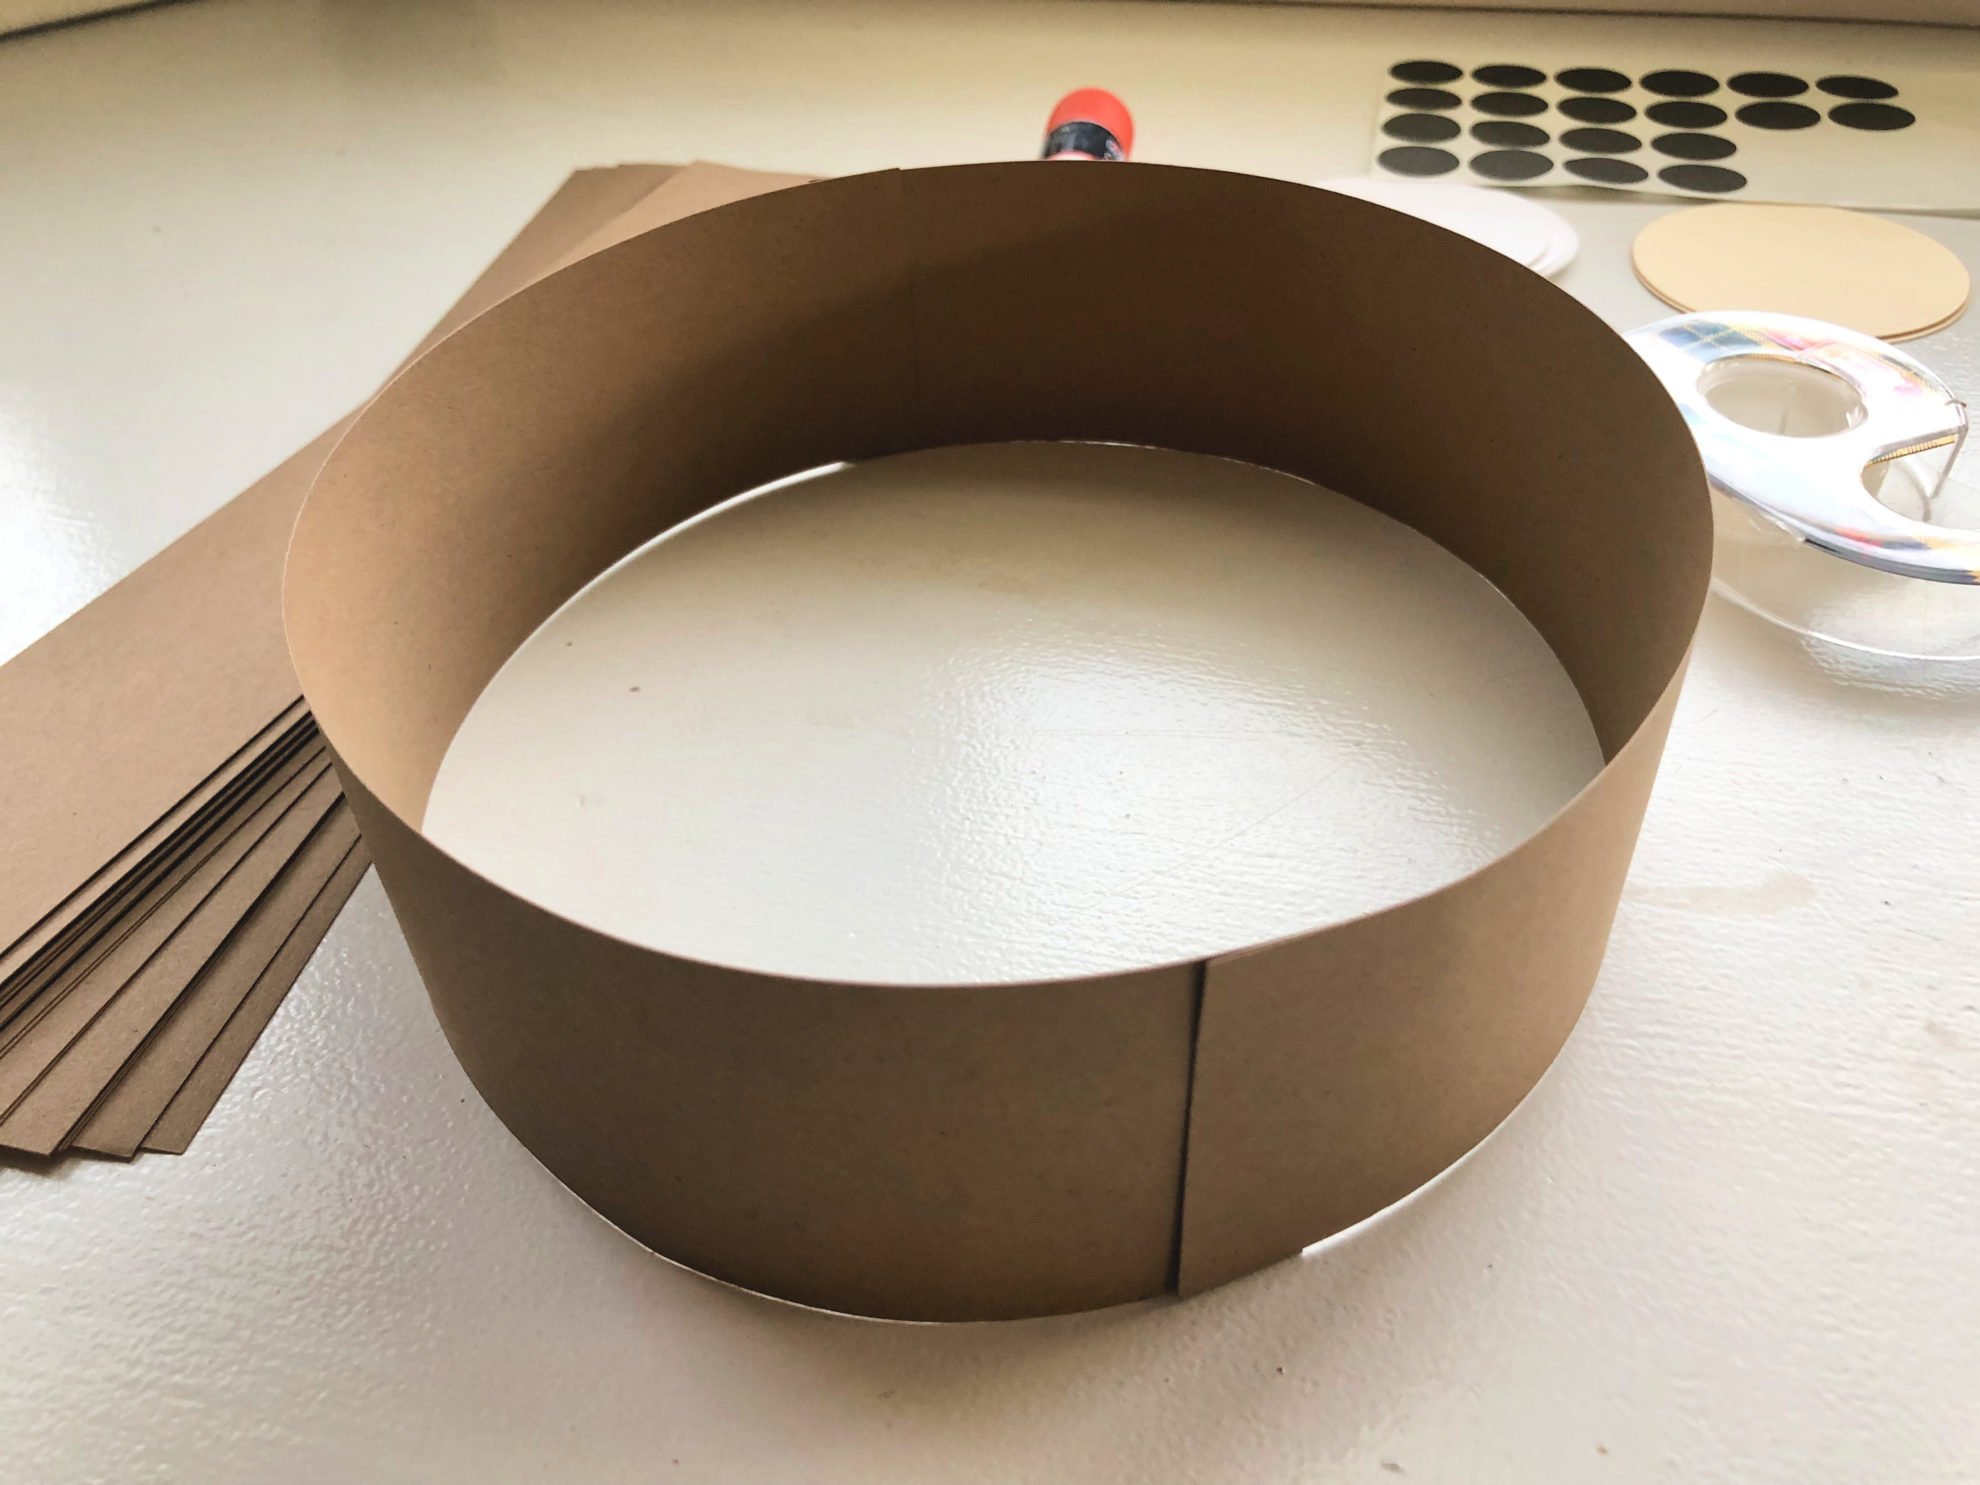 Two pieces of brown cardstock taped together to make a circular headband.